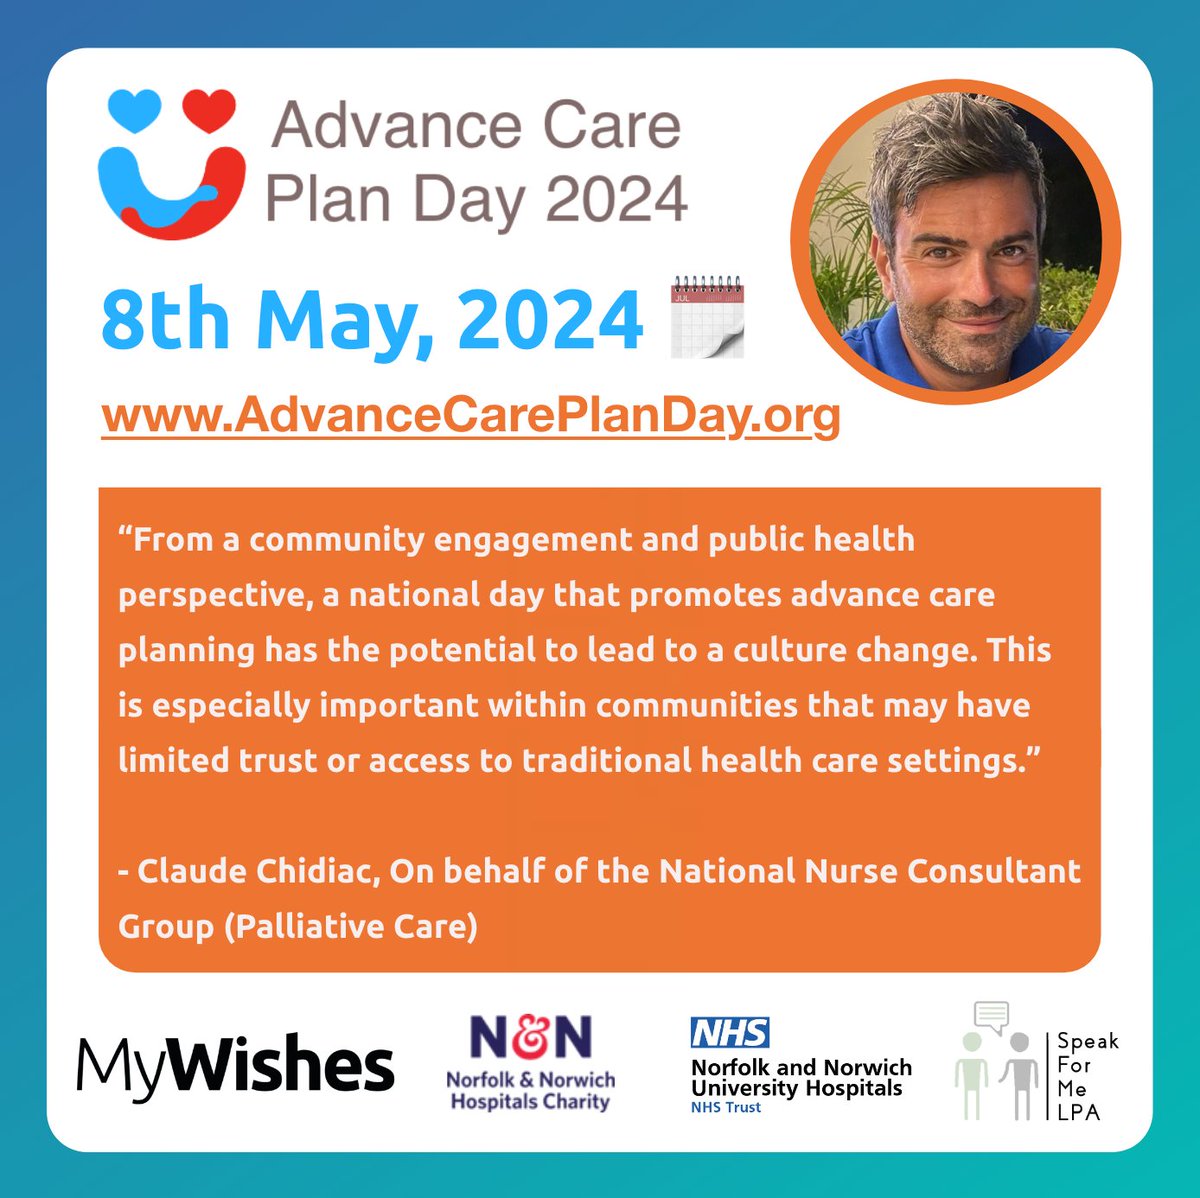 'From a community engagement and public health perspective, a national day that promotes advance care planning has the potential to lead to a culture change...' - Claude Chidiac (@claude_chidiac), on behalf of the National Nurse Consultant Group (Palliative Care). #ACPDay2024